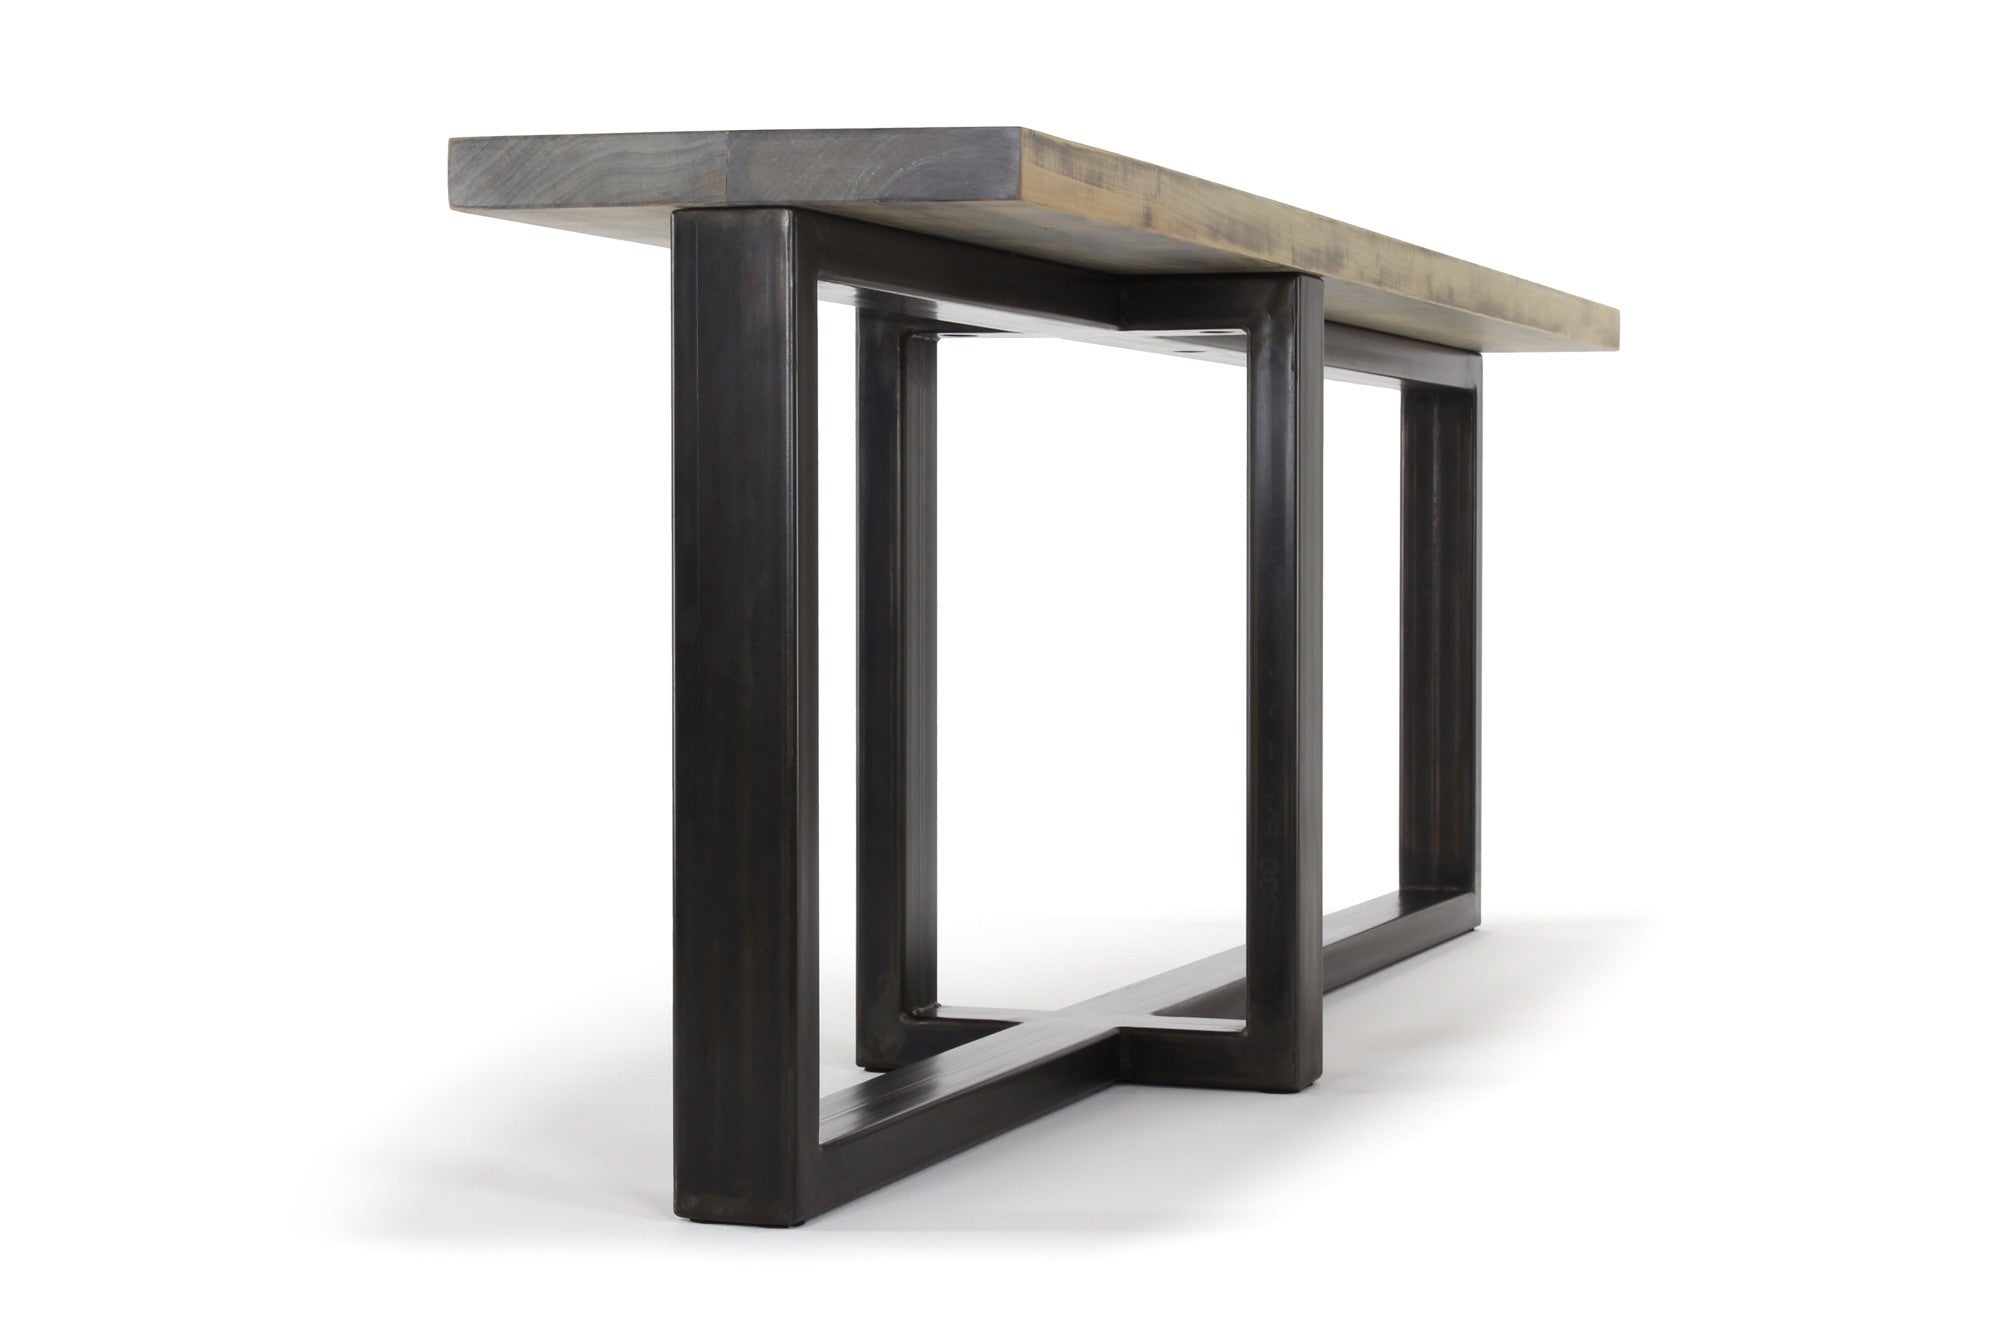 8' concord console table | worn maple wood finish with waxed steel